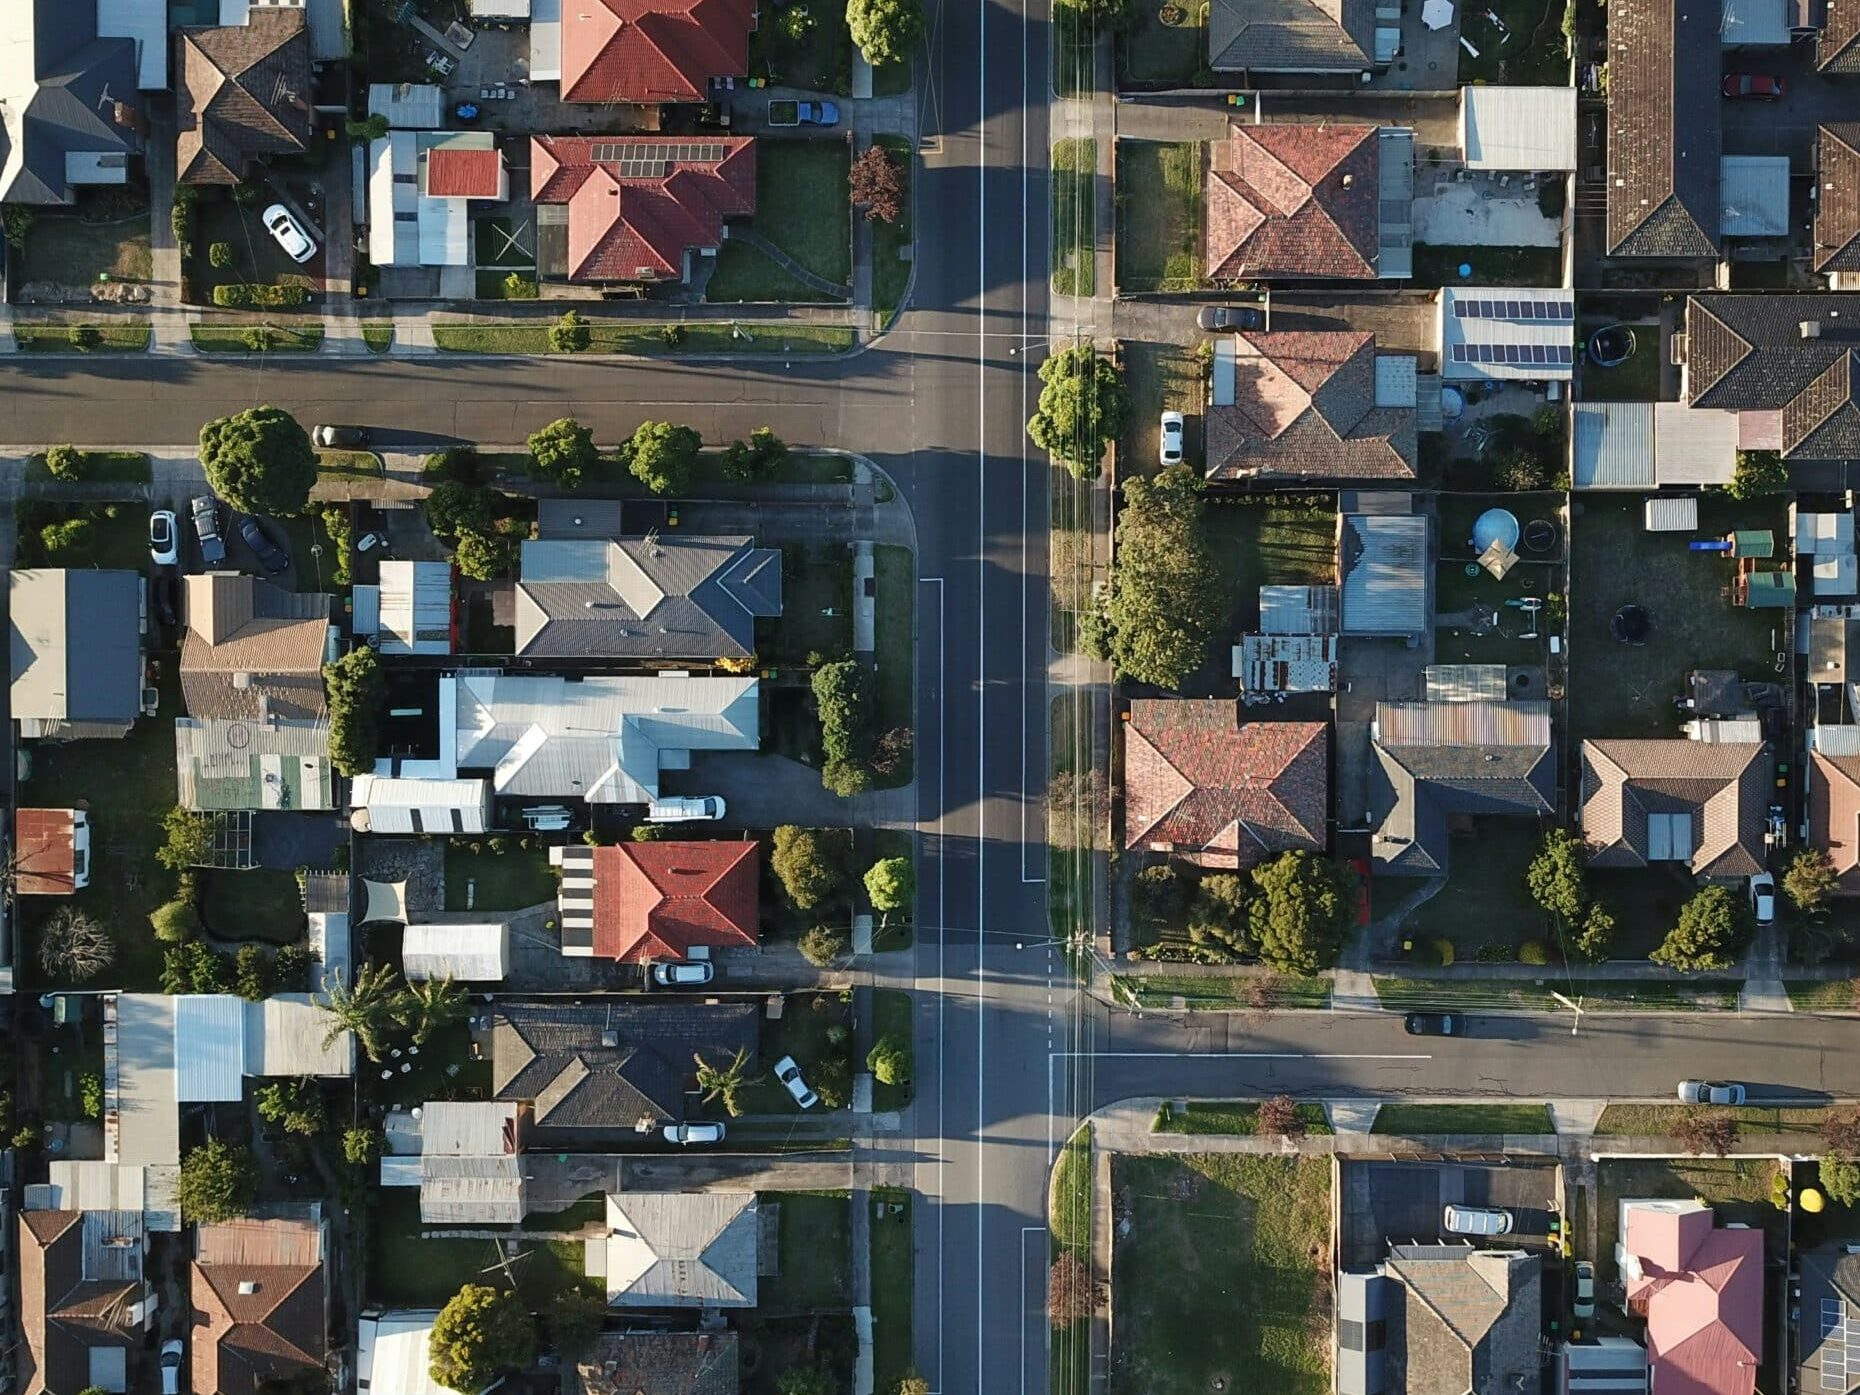 The light was fading as I was flying the Mavic back from another shoot and the symmetry of these streets caught my eye. Love me some long afternoon shadows.